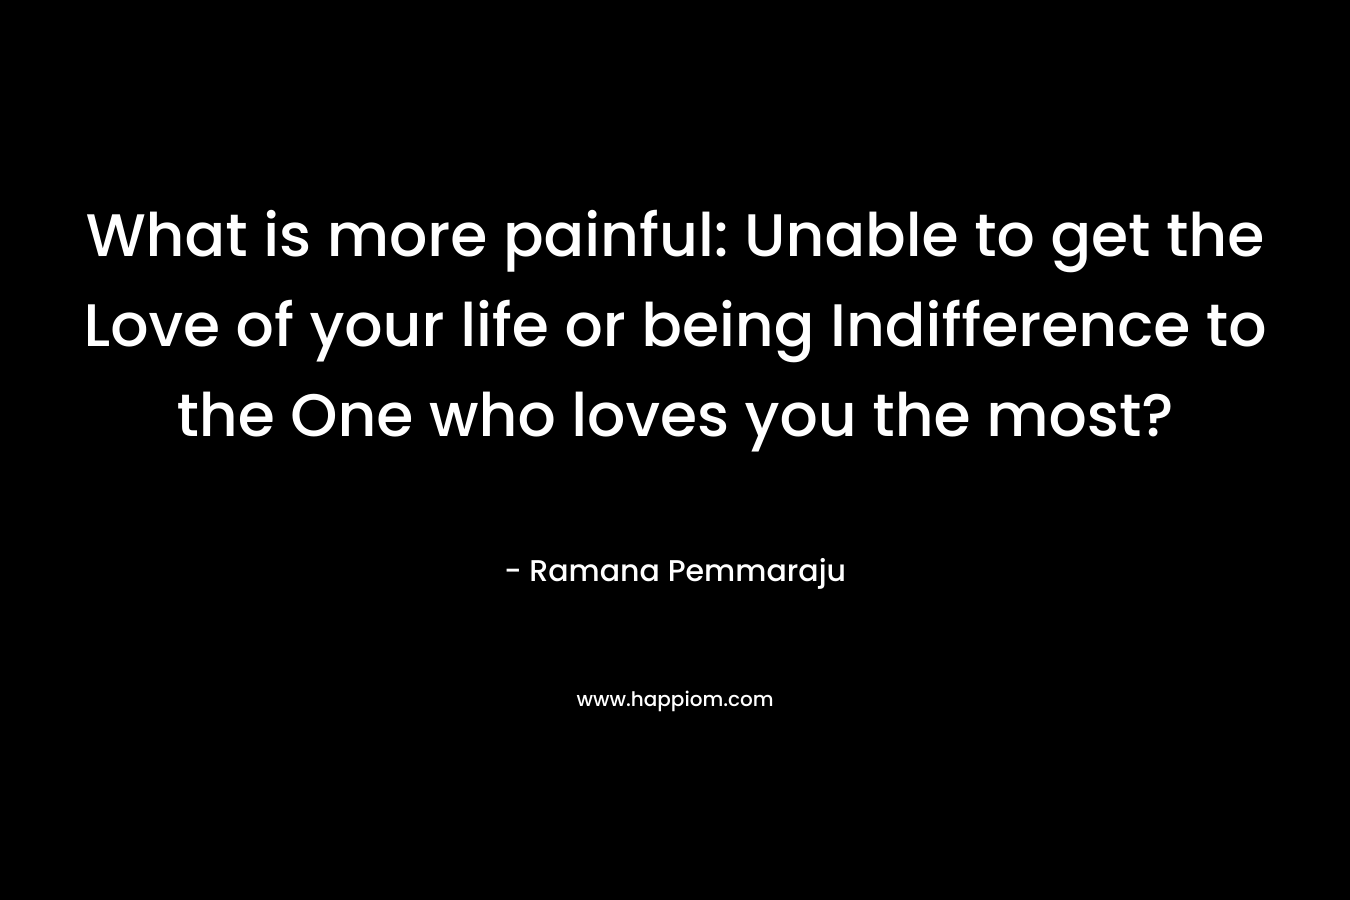 What is more painful: Unable to get the Love of your life or being Indifference to the One who loves you the most?